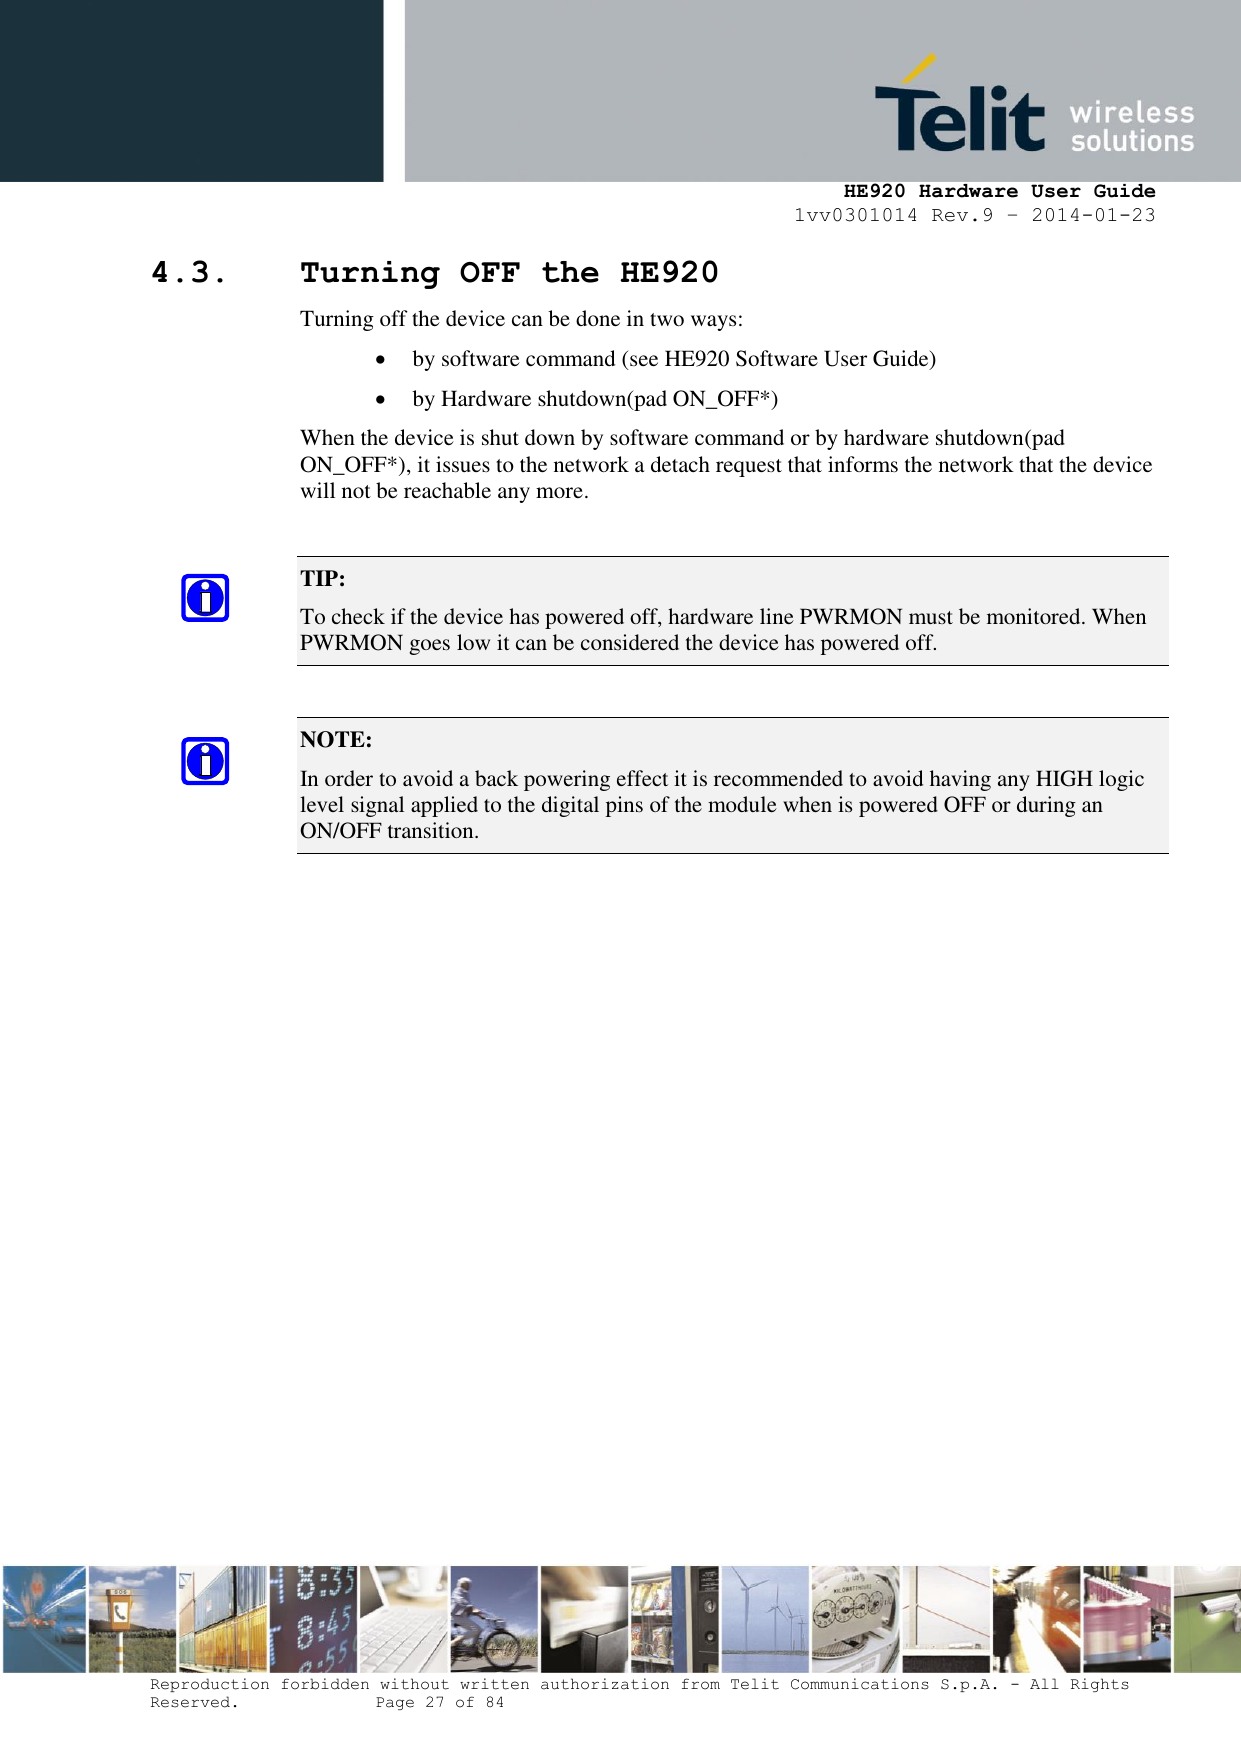     HE920 Hardware User Guide 1vv0301014 Rev.9 – 2014-01-23 Reproduction forbidden without written authorization from Telit Communications S.p.A. - All Rights Reserved.    Page 27 of 84  4.3. Turning OFF the HE920 Turning off the device can be done in two ways:  by software command (see HE920 Software User Guide)  by Hardware shutdown(pad ON_OFF*) When the device is shut down by software command or by hardware shutdown(pad  ON_OFF*), it issues to the network a detach request that informs the network that the device will not be reachable any more.  TIP:  To check if the device has powered off, hardware line PWRMON must be monitored. When PWRMON goes low it can be considered the device has powered off.  NOTE:  In order to avoid a back powering effect it is recommended to avoid having any HIGH logic level signal applied to the digital pins of the module when is powered OFF or during an ON/OFF transition. 